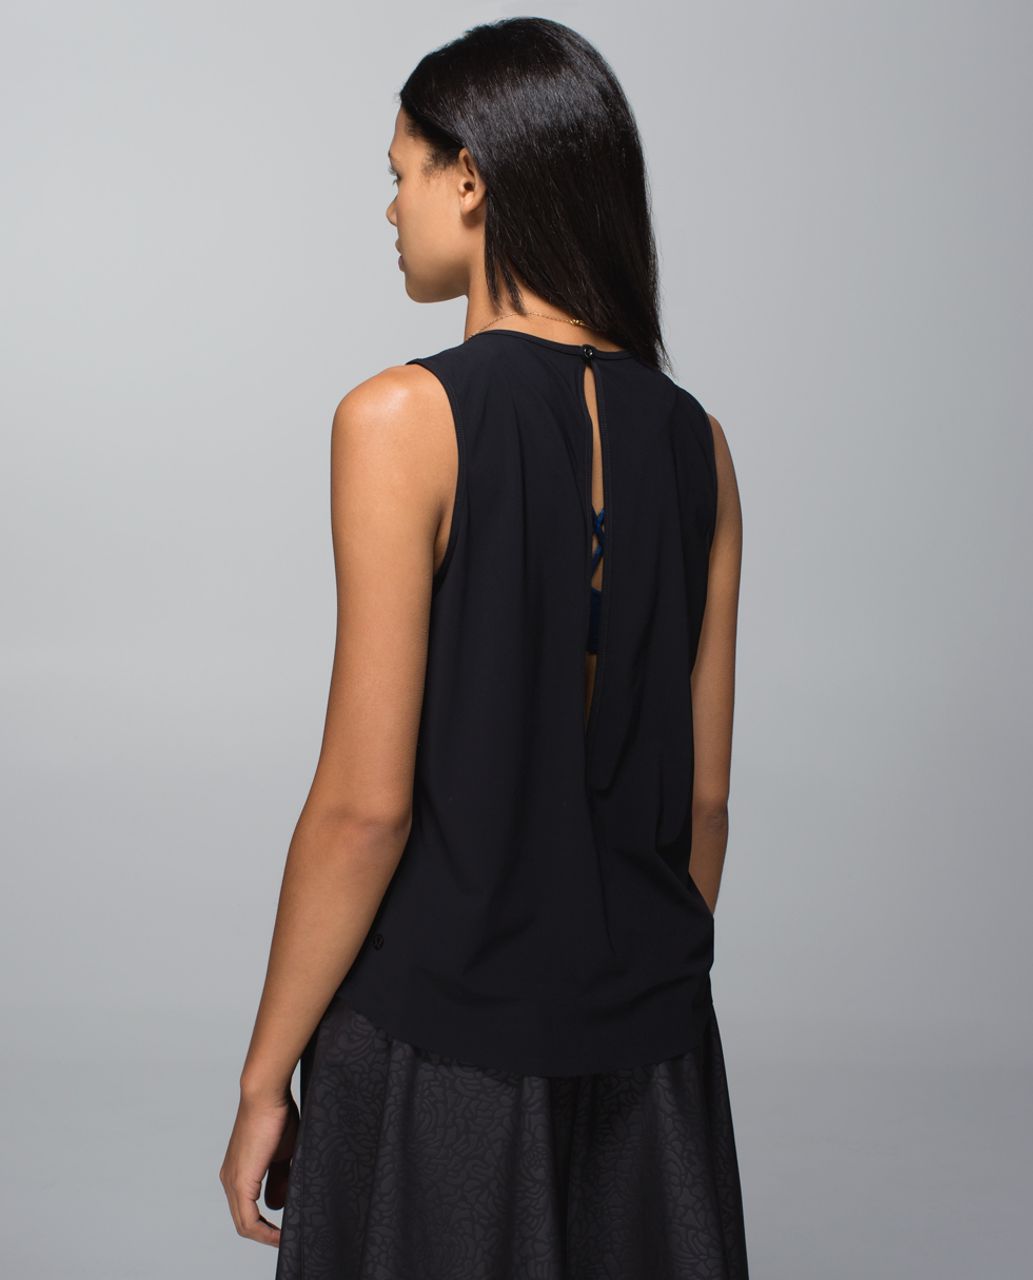 Lululemon Here To There Tank - Black